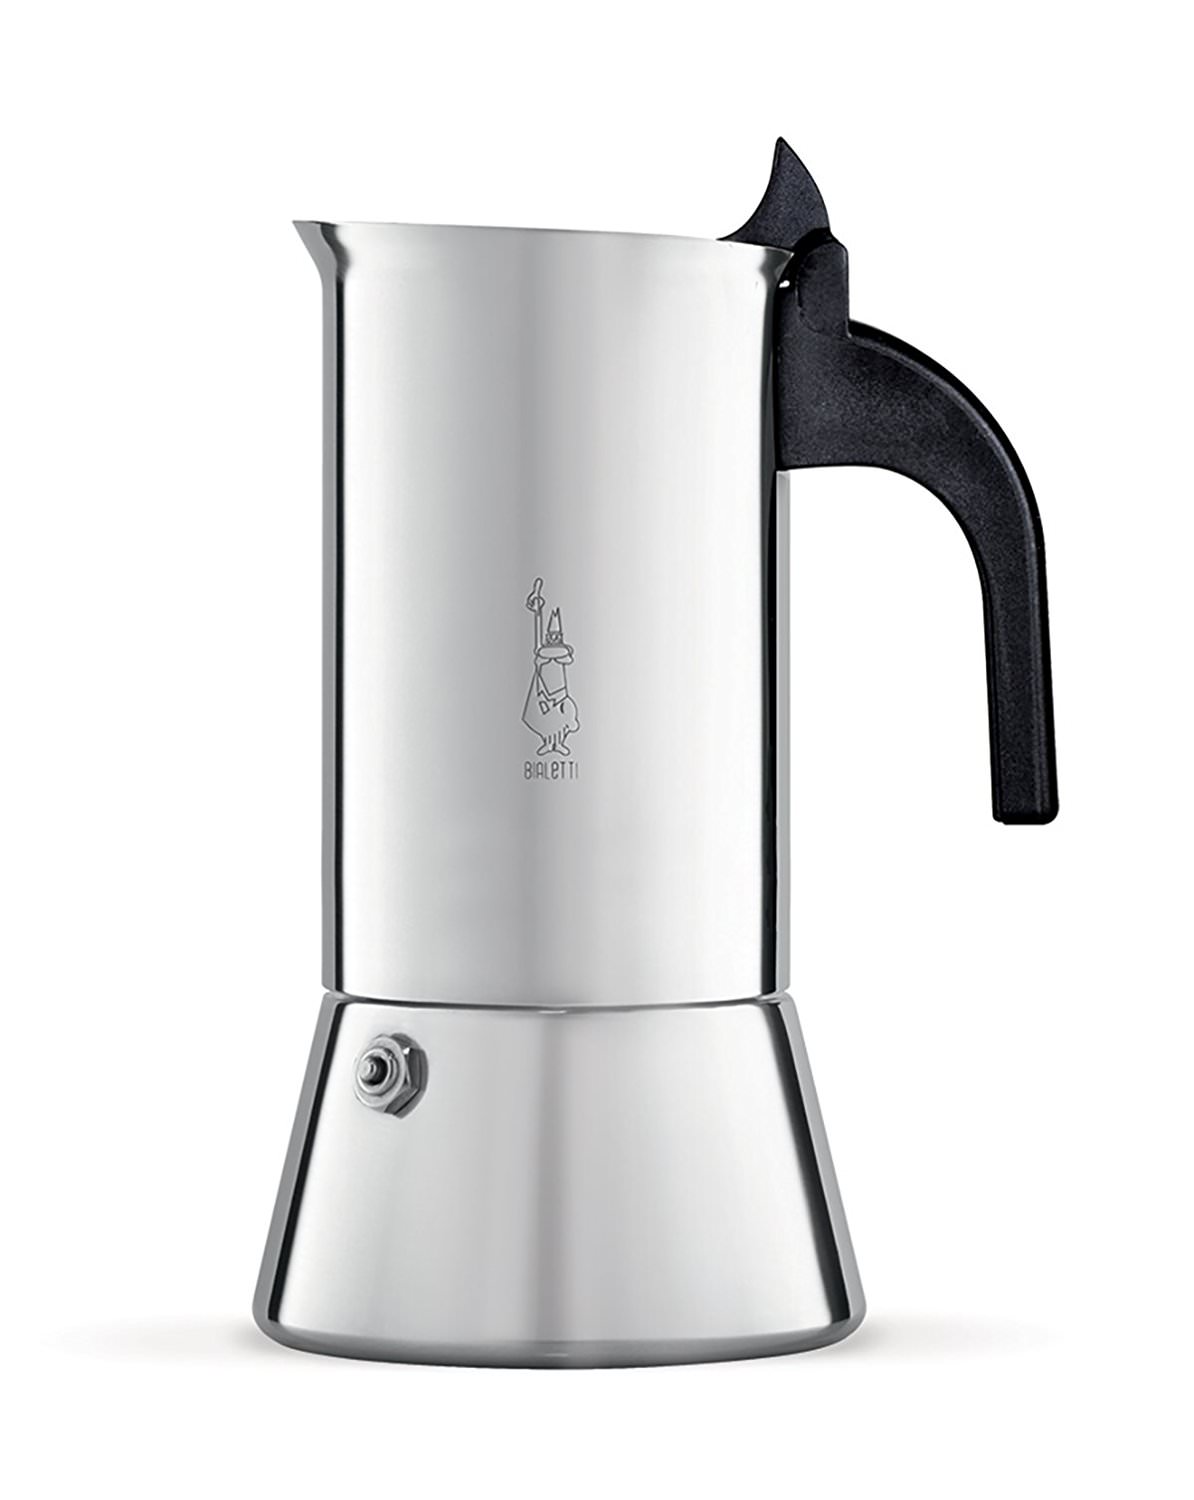 Bialetti Venus Stainless Steel Stovetop Espresso Coffee Maker, 6-Cup - image 1 of 3